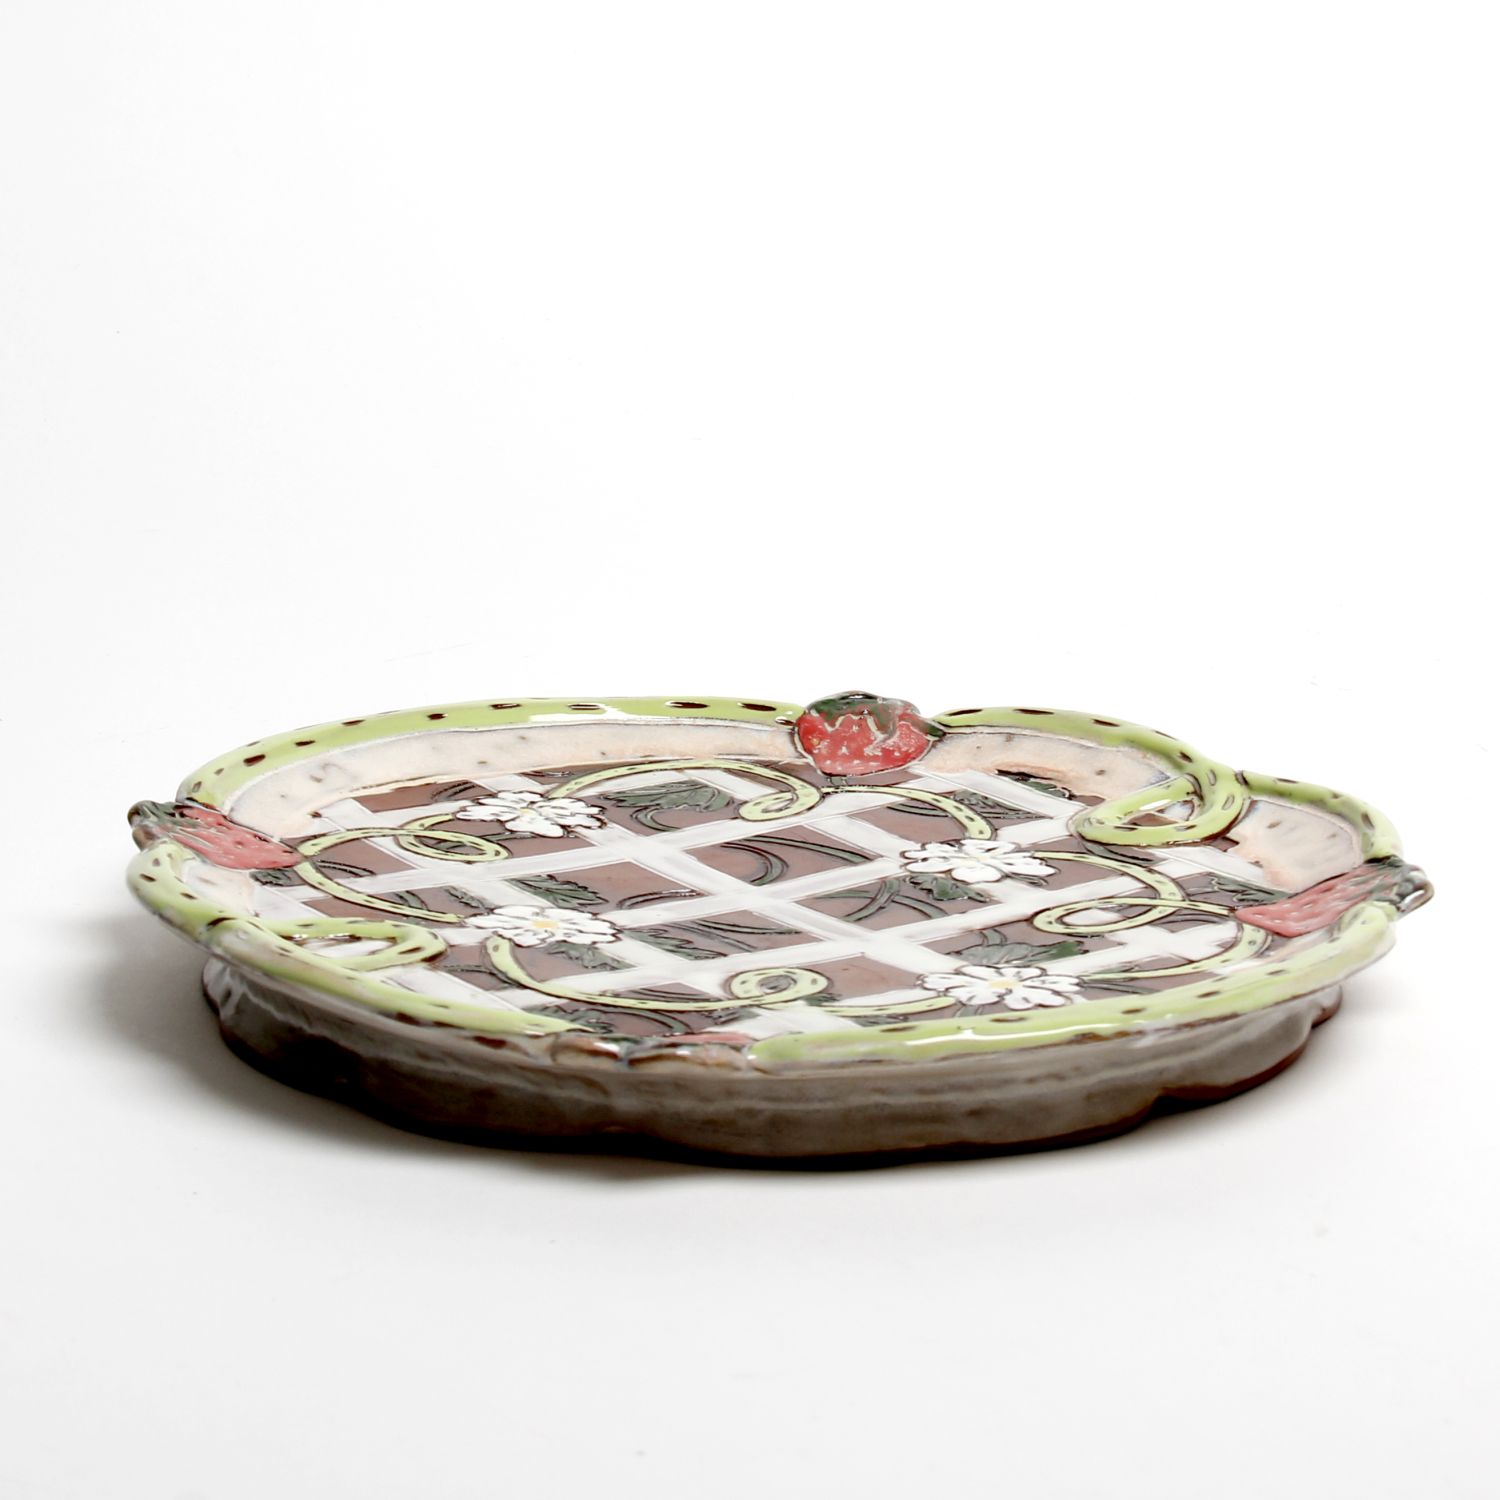 Zoe Pinnell: Strawberry Plate Product Image 3 of 3